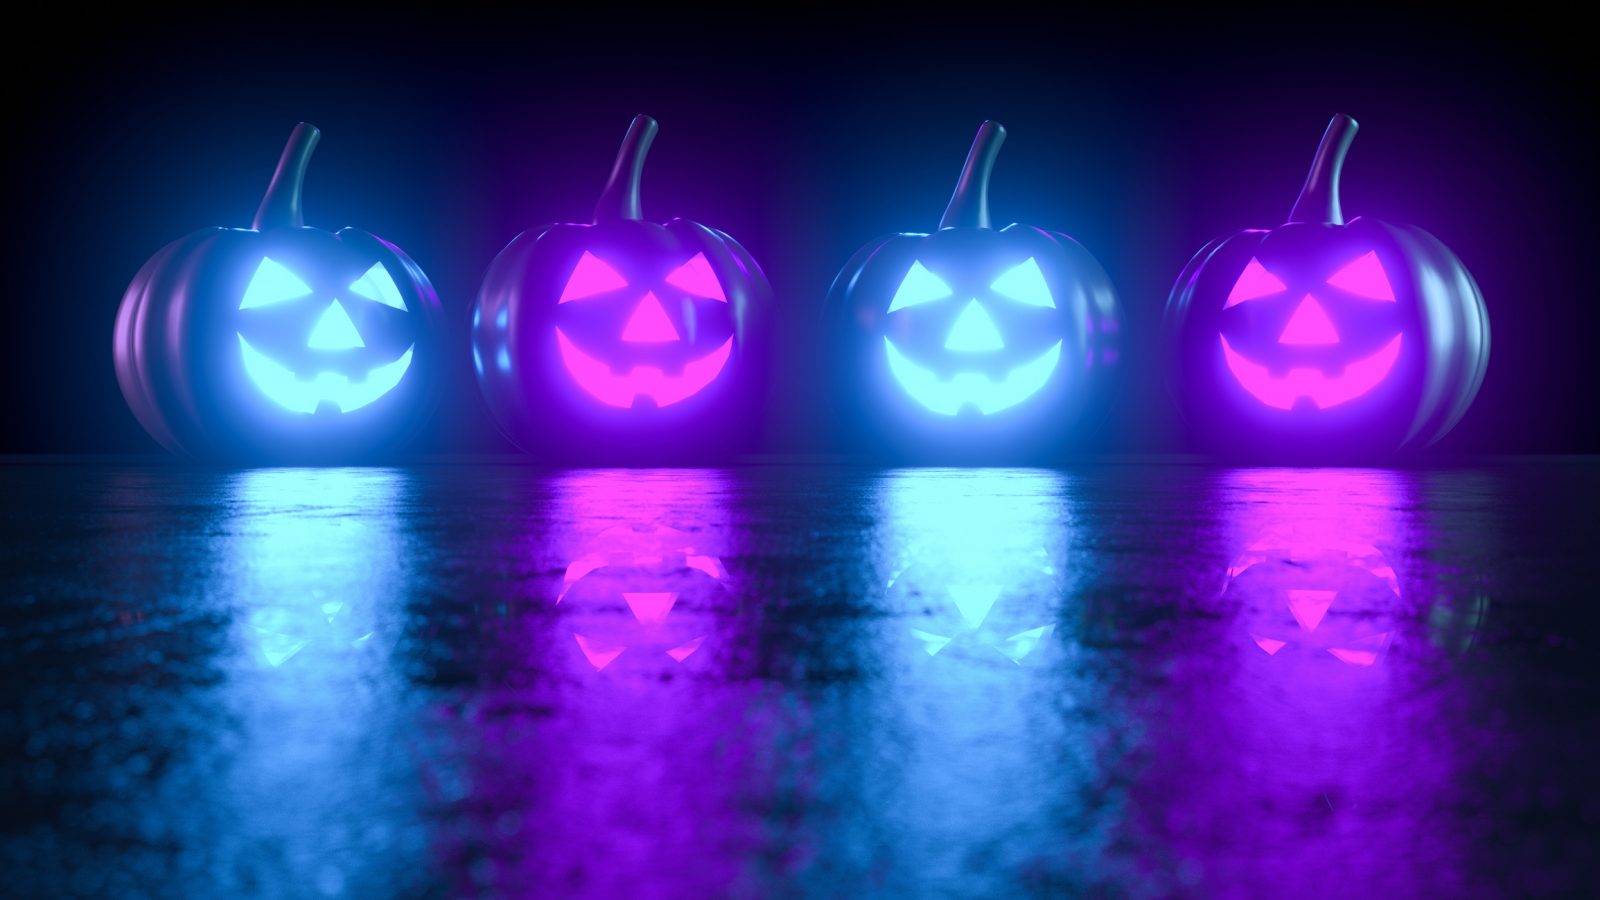 Four jack-o-lanterns, two lit in blue and two in purple, on a dark background.